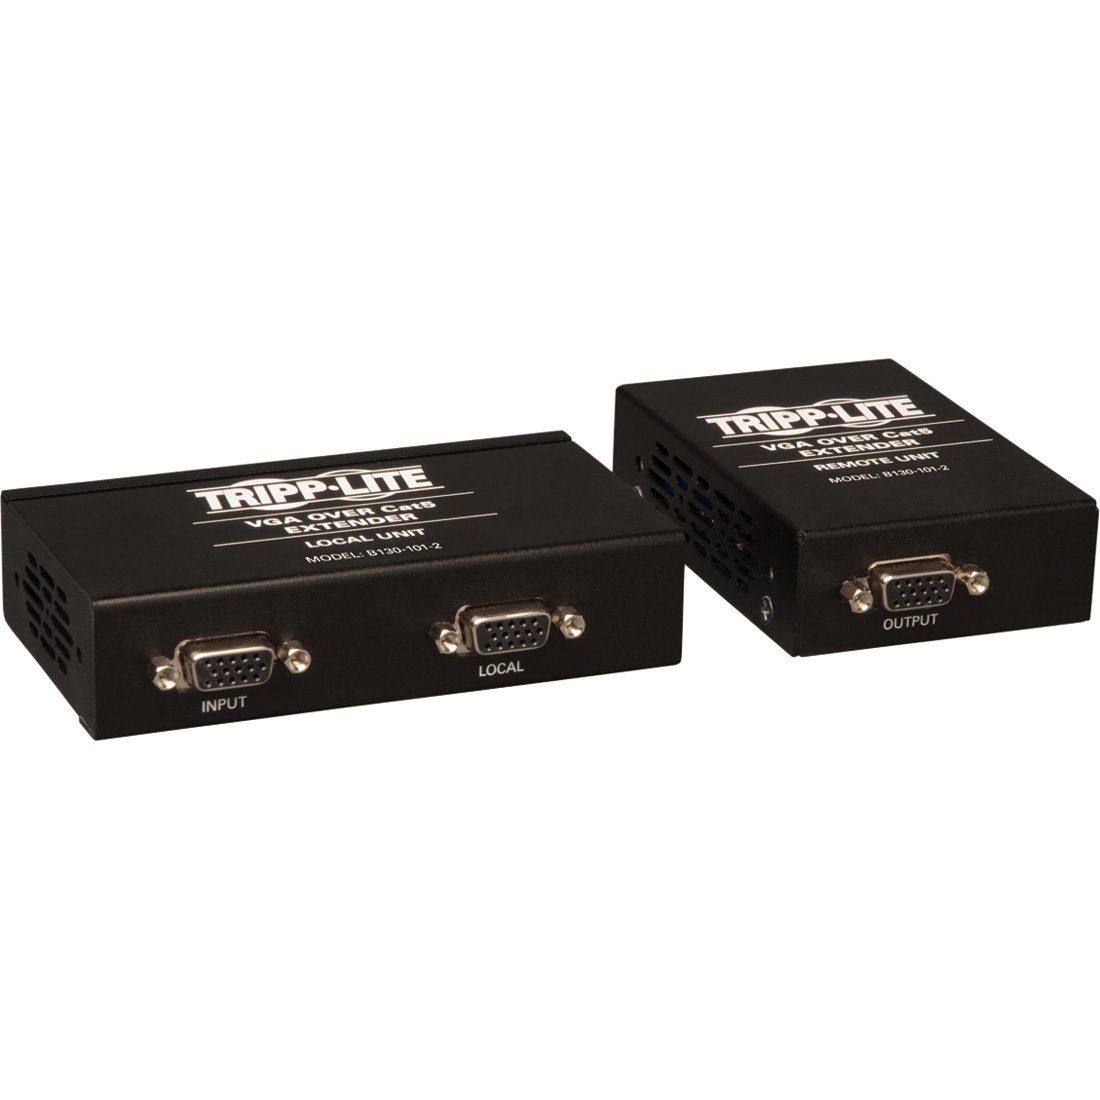 Tripp Lite by Eaton VGA over Cat5/6 Extender Kit, Box-Style Transmitter/Receiver for Video, Up to 1000 ft. (305 m), TAA